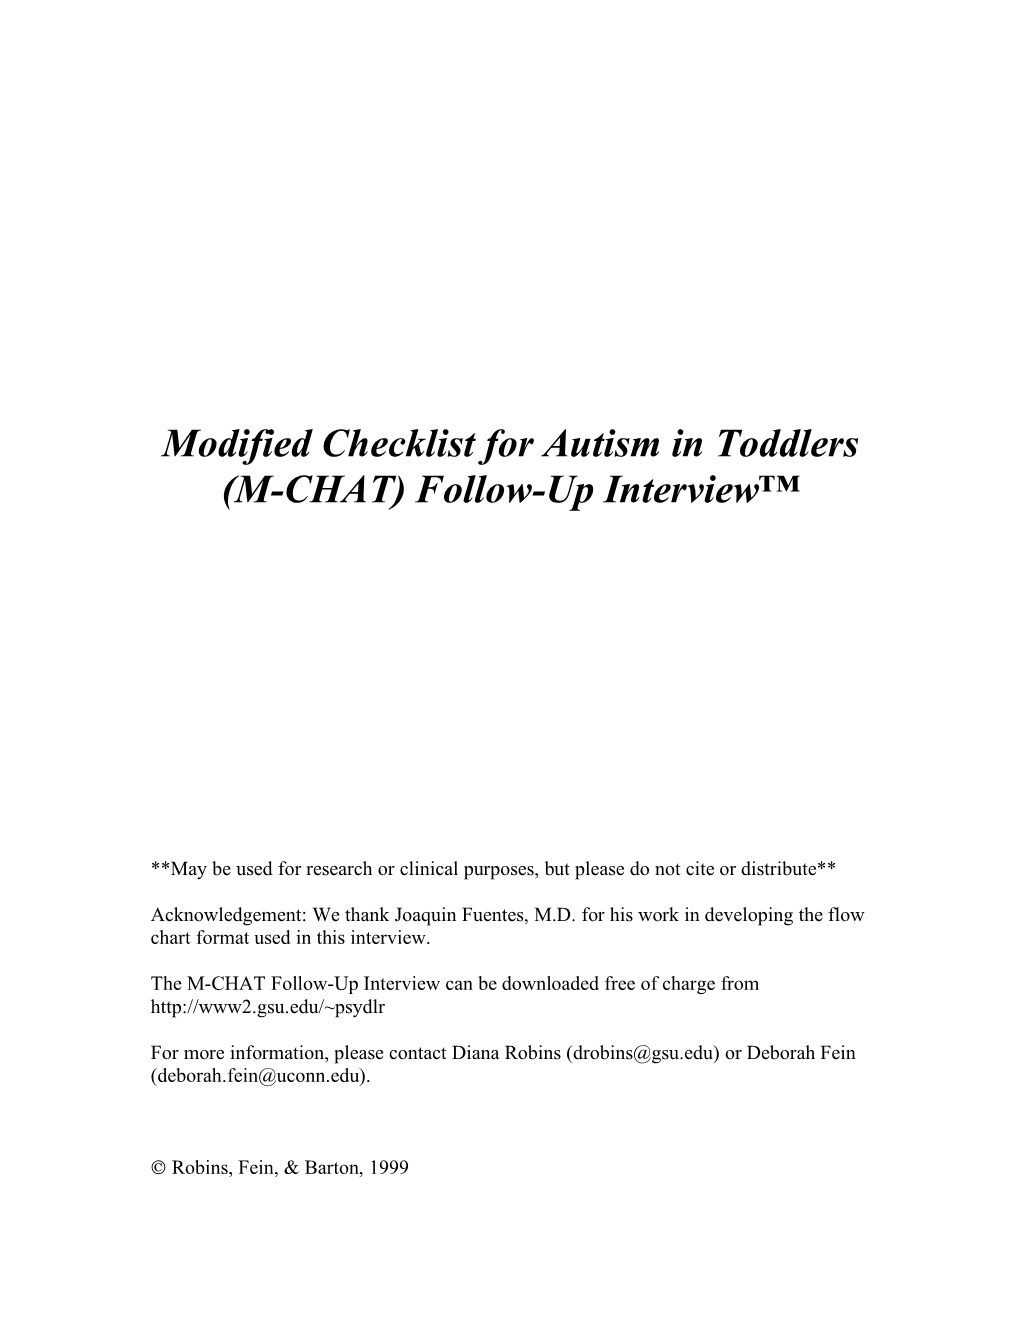 Modified Checklist for Autism in Toddlers (M-CHAT) Follow-Up Interview™